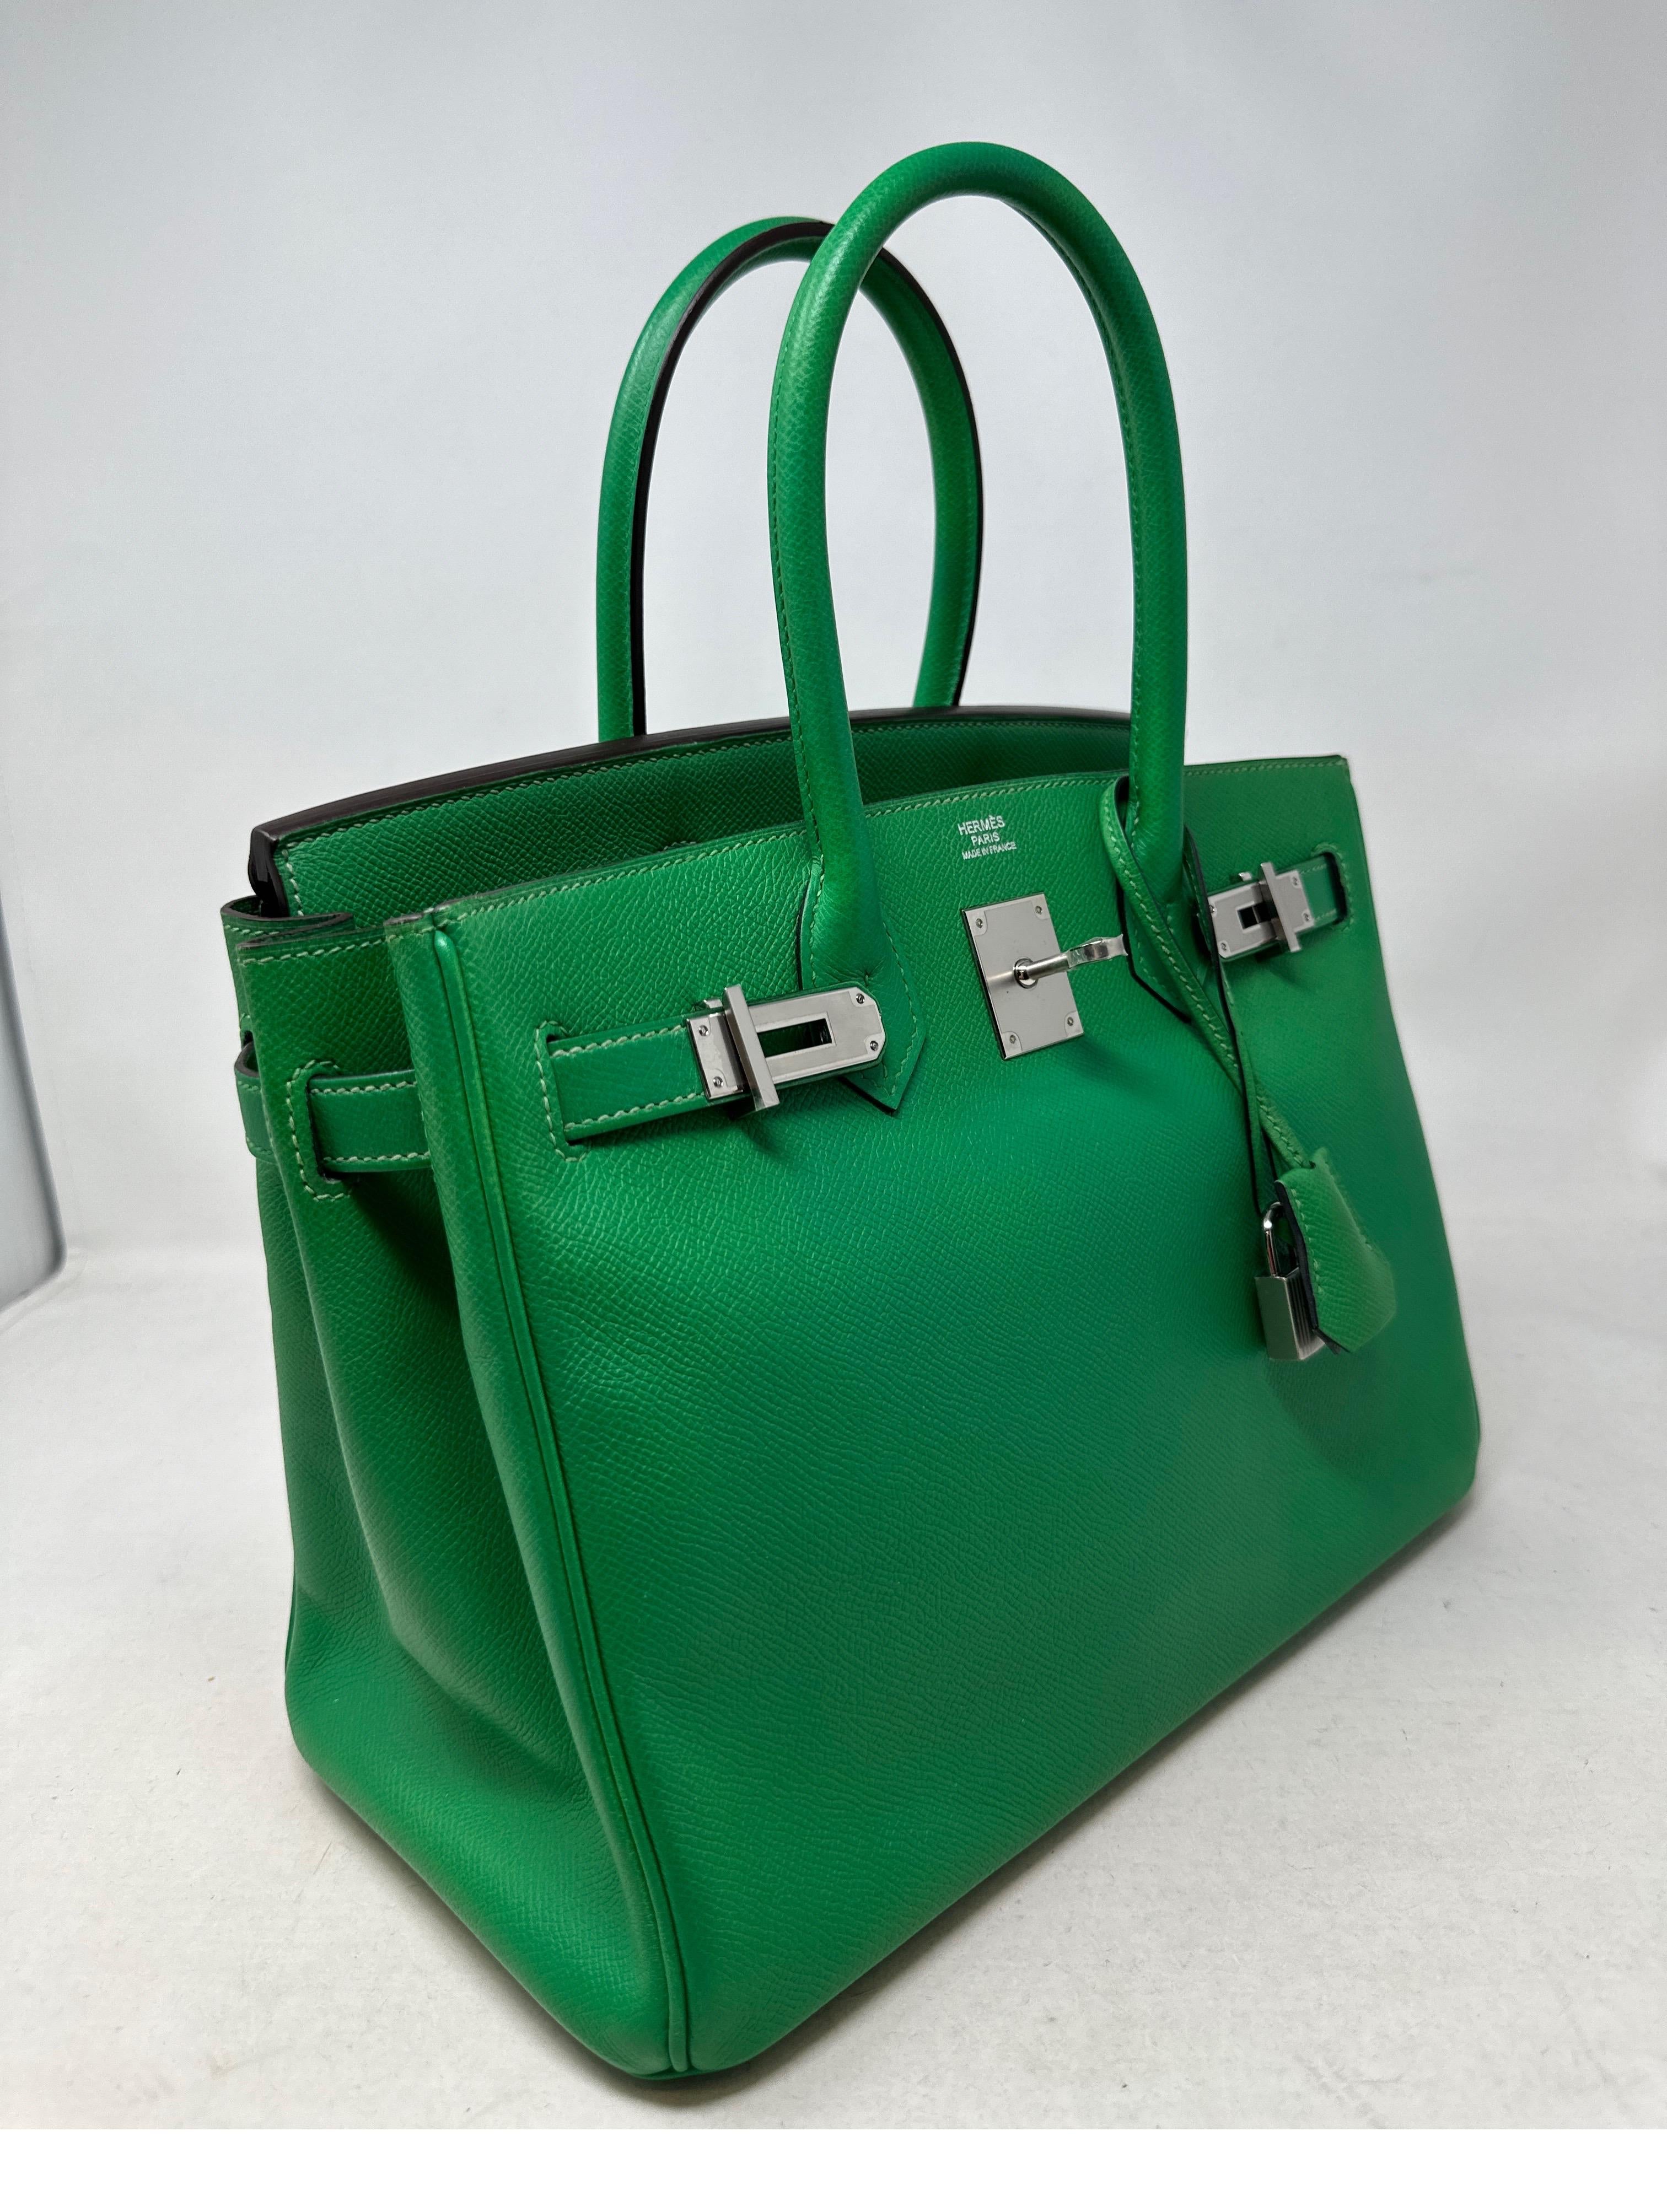 Hermes Bamboo Birkin 30 Bag  In Excellent Condition For Sale In Athens, GA